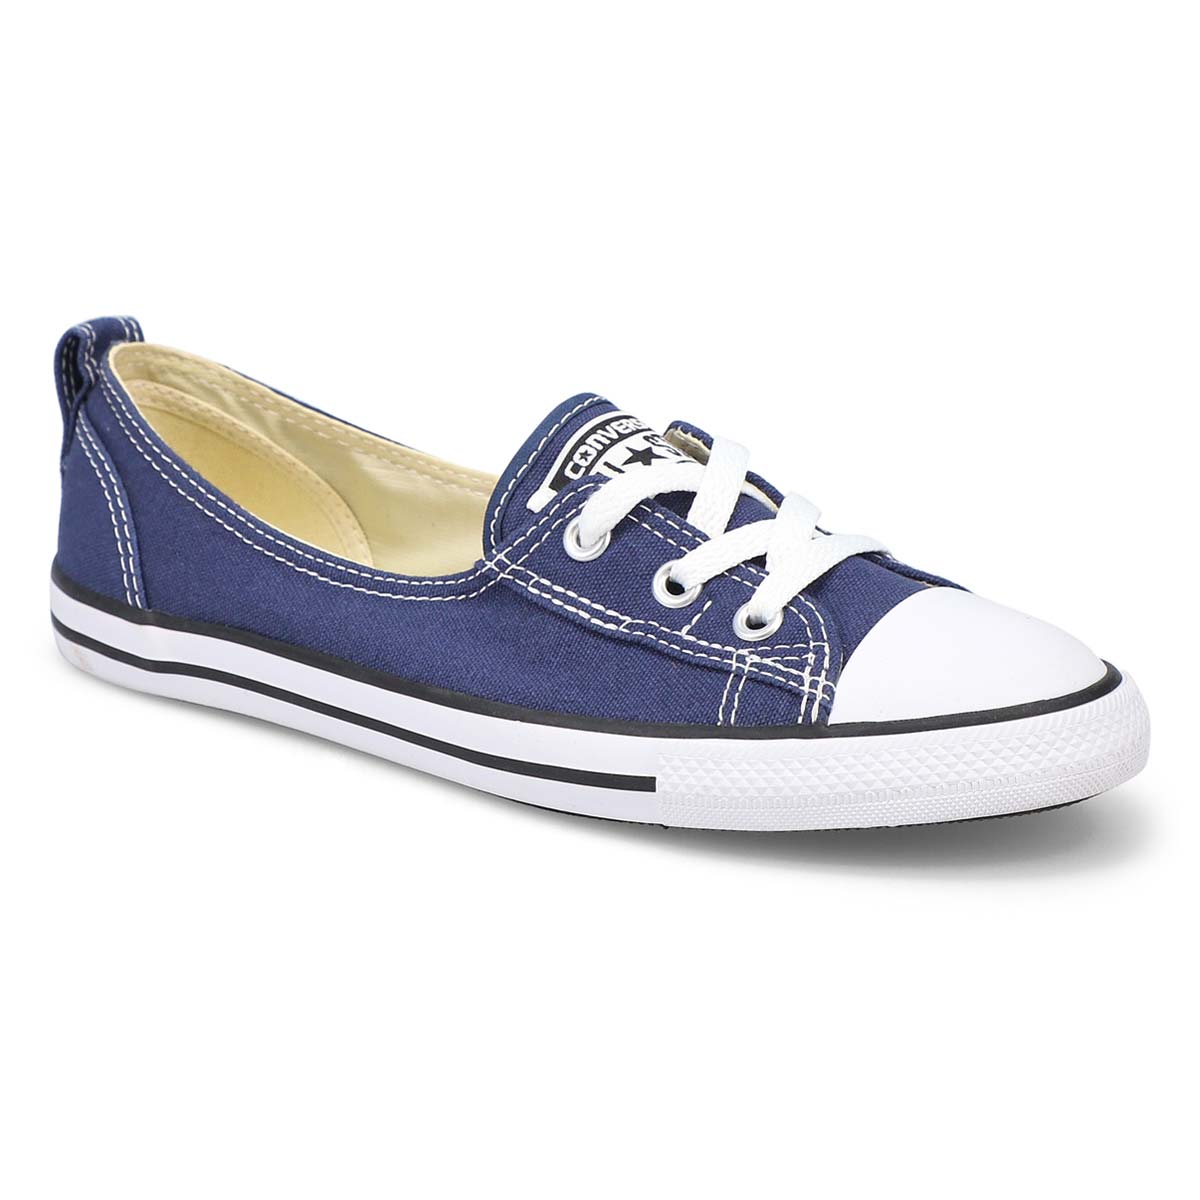 slip on converse shoes